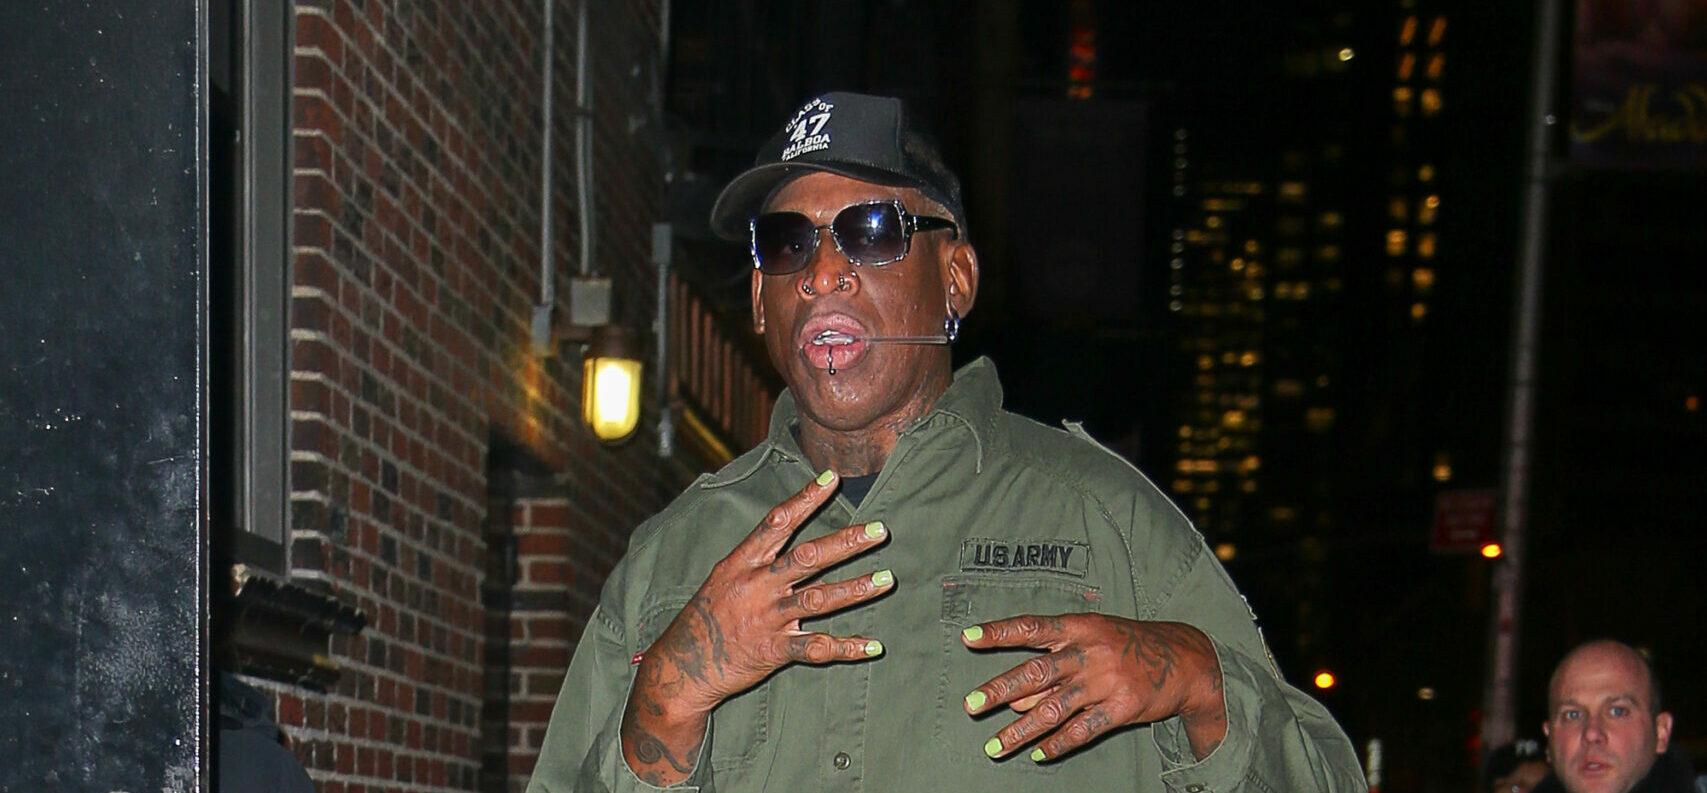 Dennis Rodman spotted showing his green nails as arriving at The Late Show with Stephen Colbert in NYC